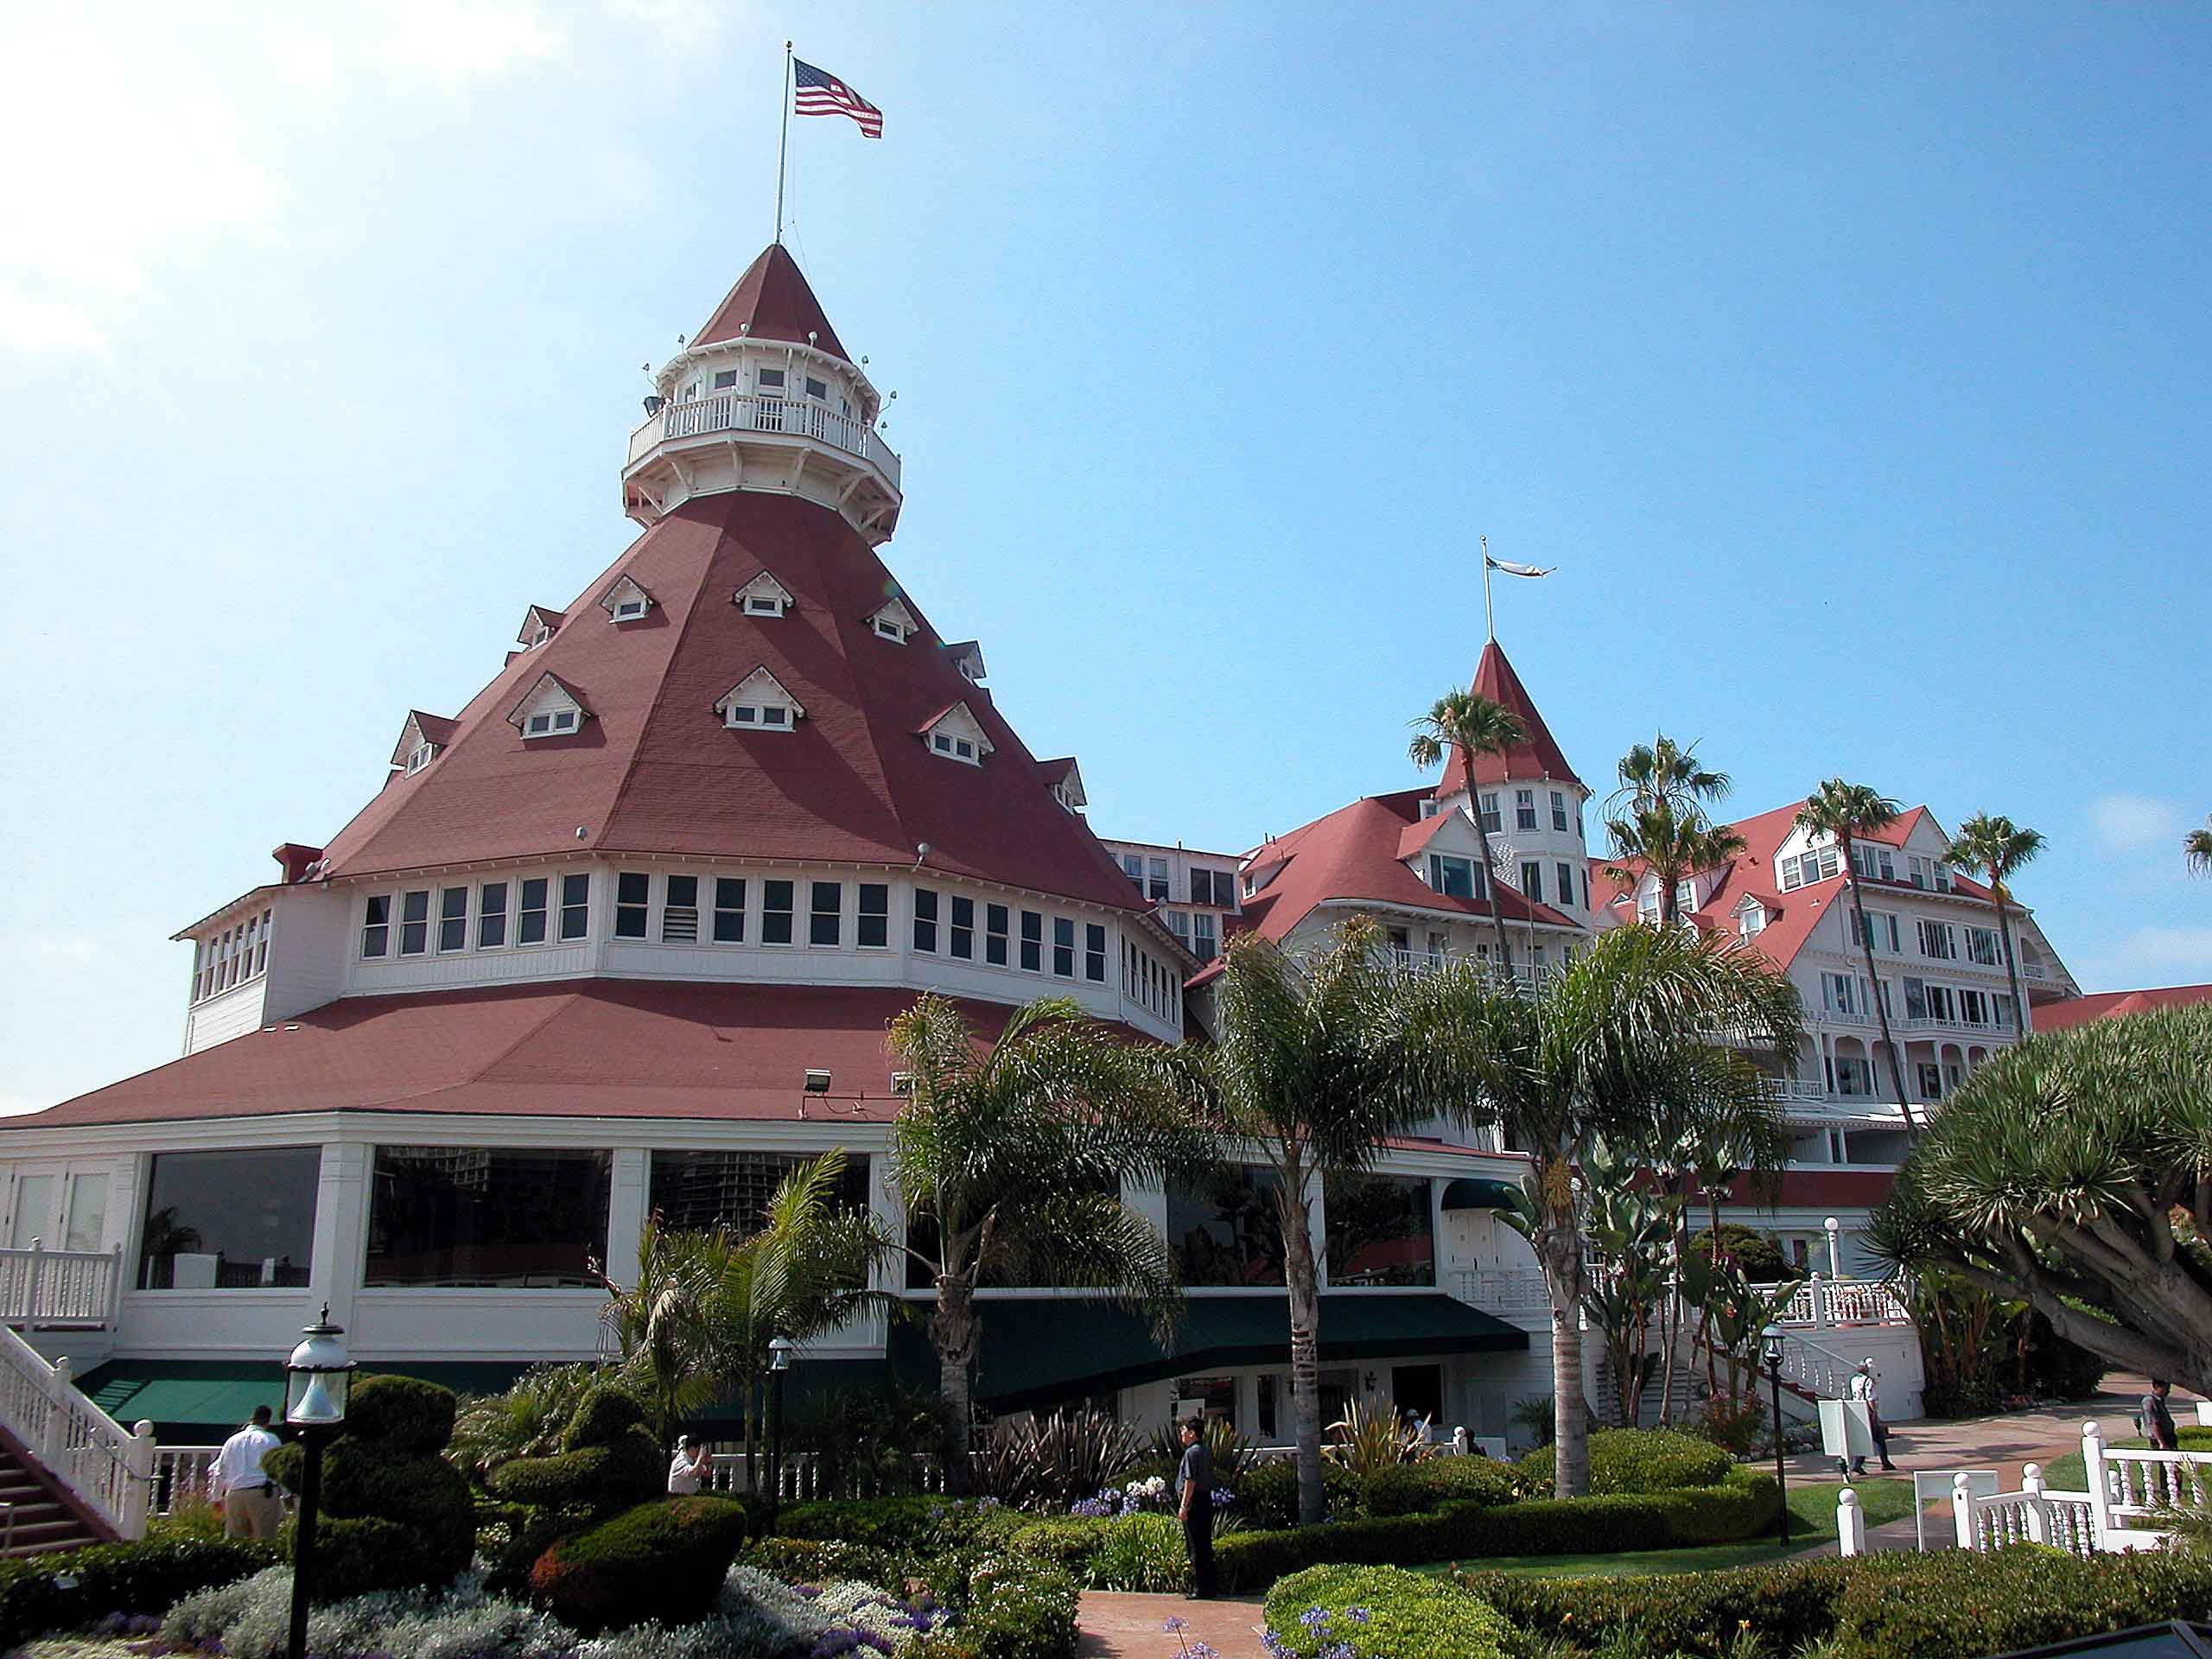 Historic and famous Hotel Del Coronado - affectionately known as the Del